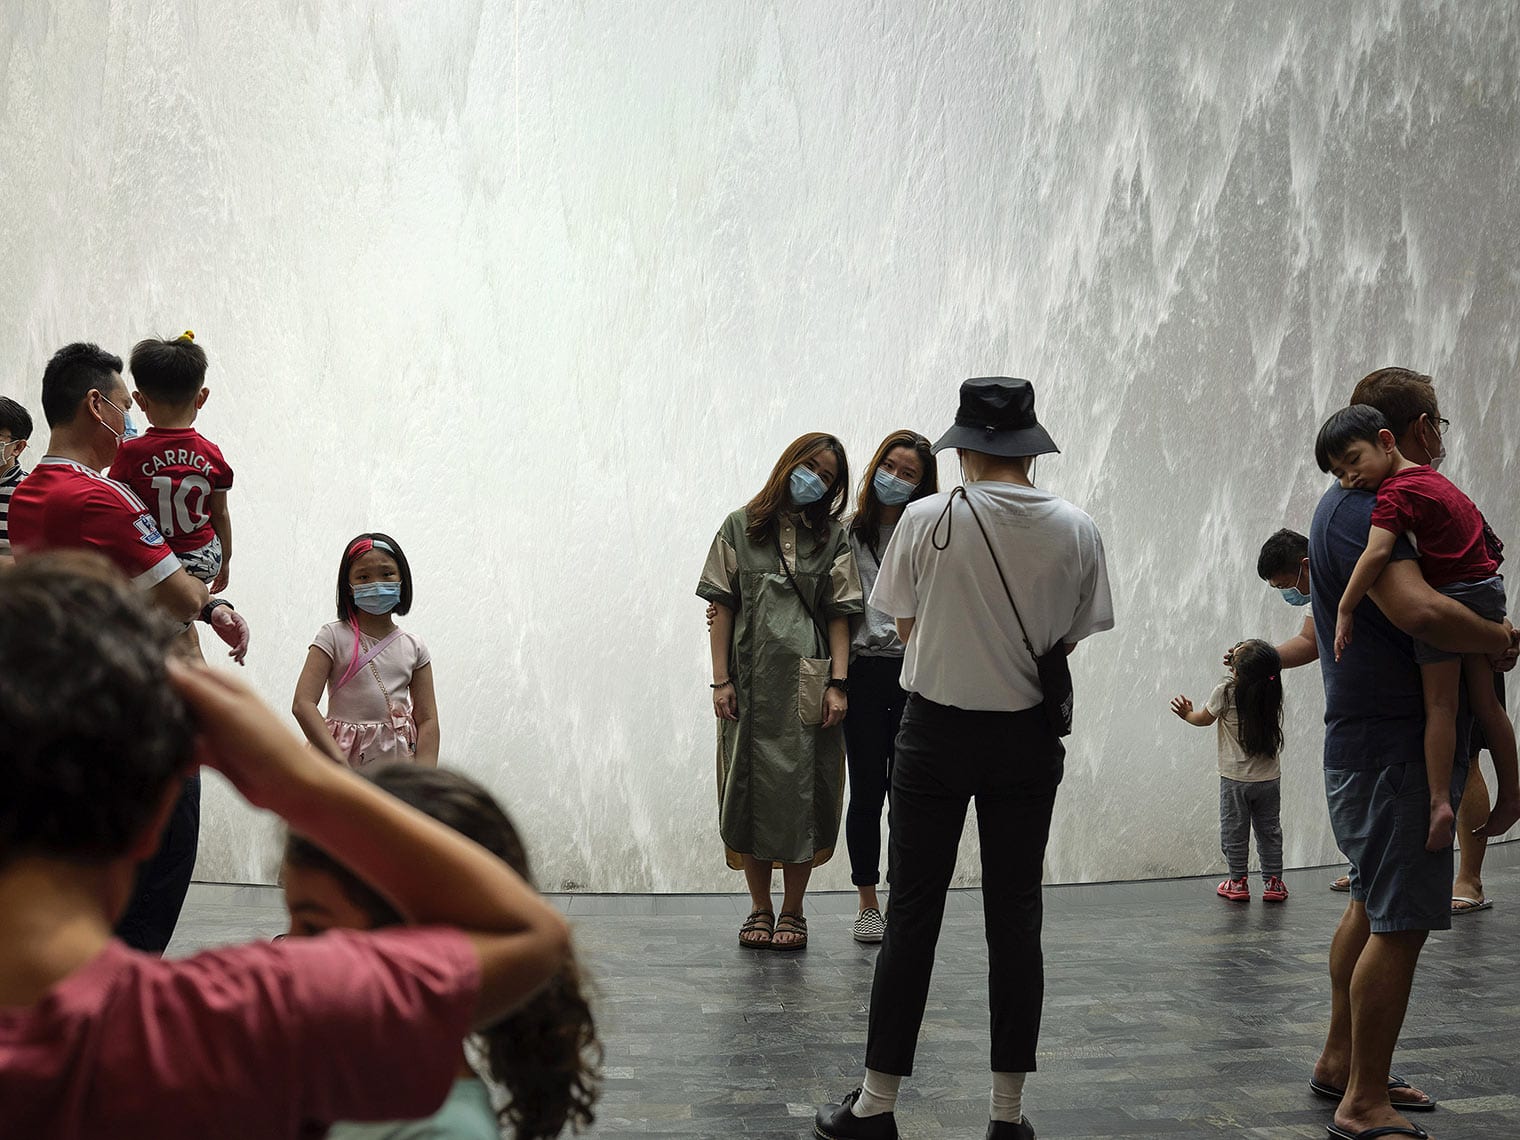 Several masked people stand, look, and take pictures in front of a wall of water